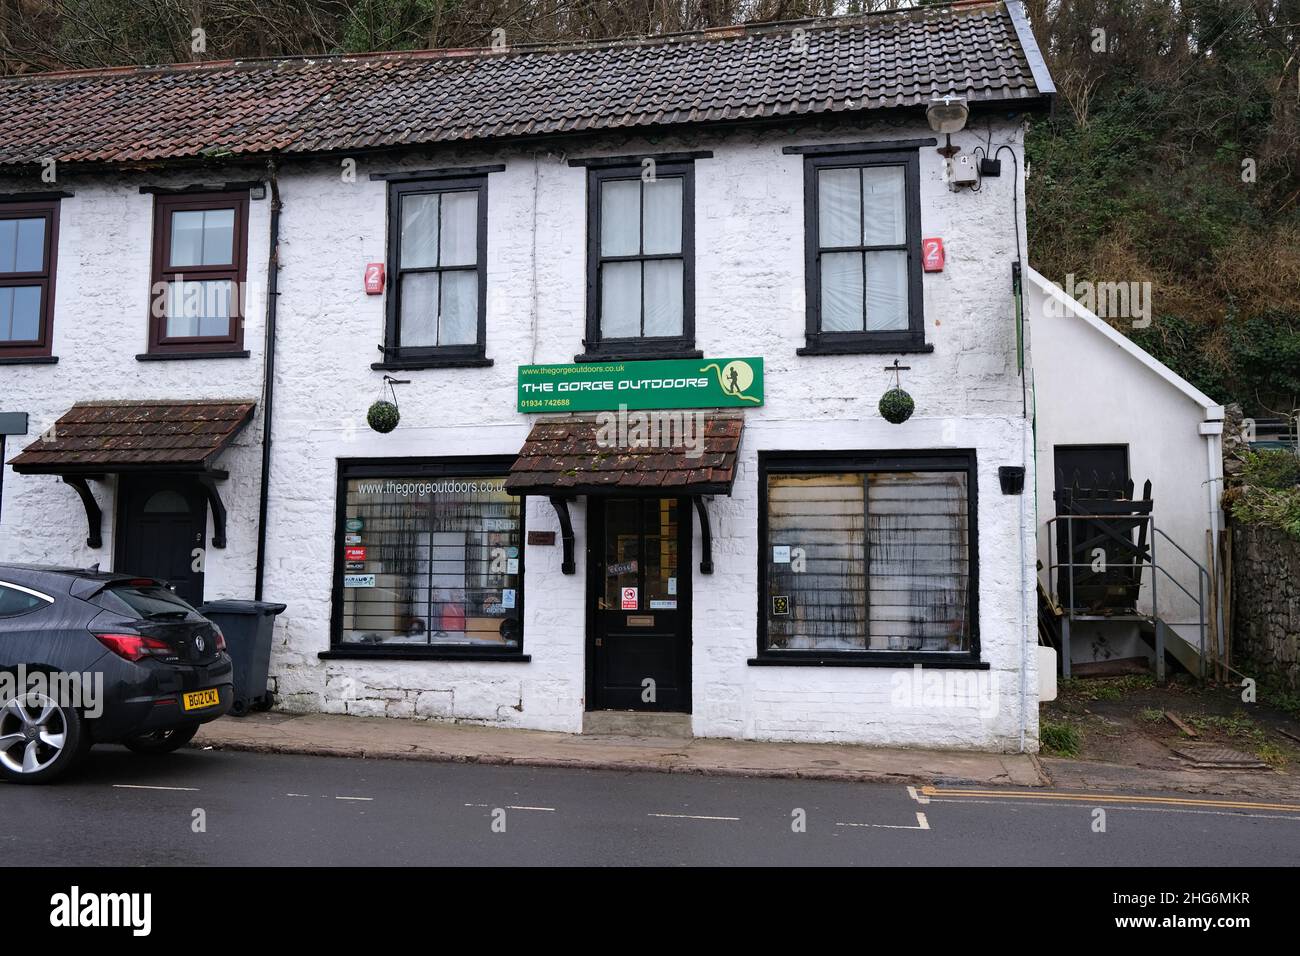 January 2022 - The Gorge Outdoors, a shop selling outdoor gear for tourists as well as serious walker & climbers in Cheddar, Somerset, England, UK. Stock Photo